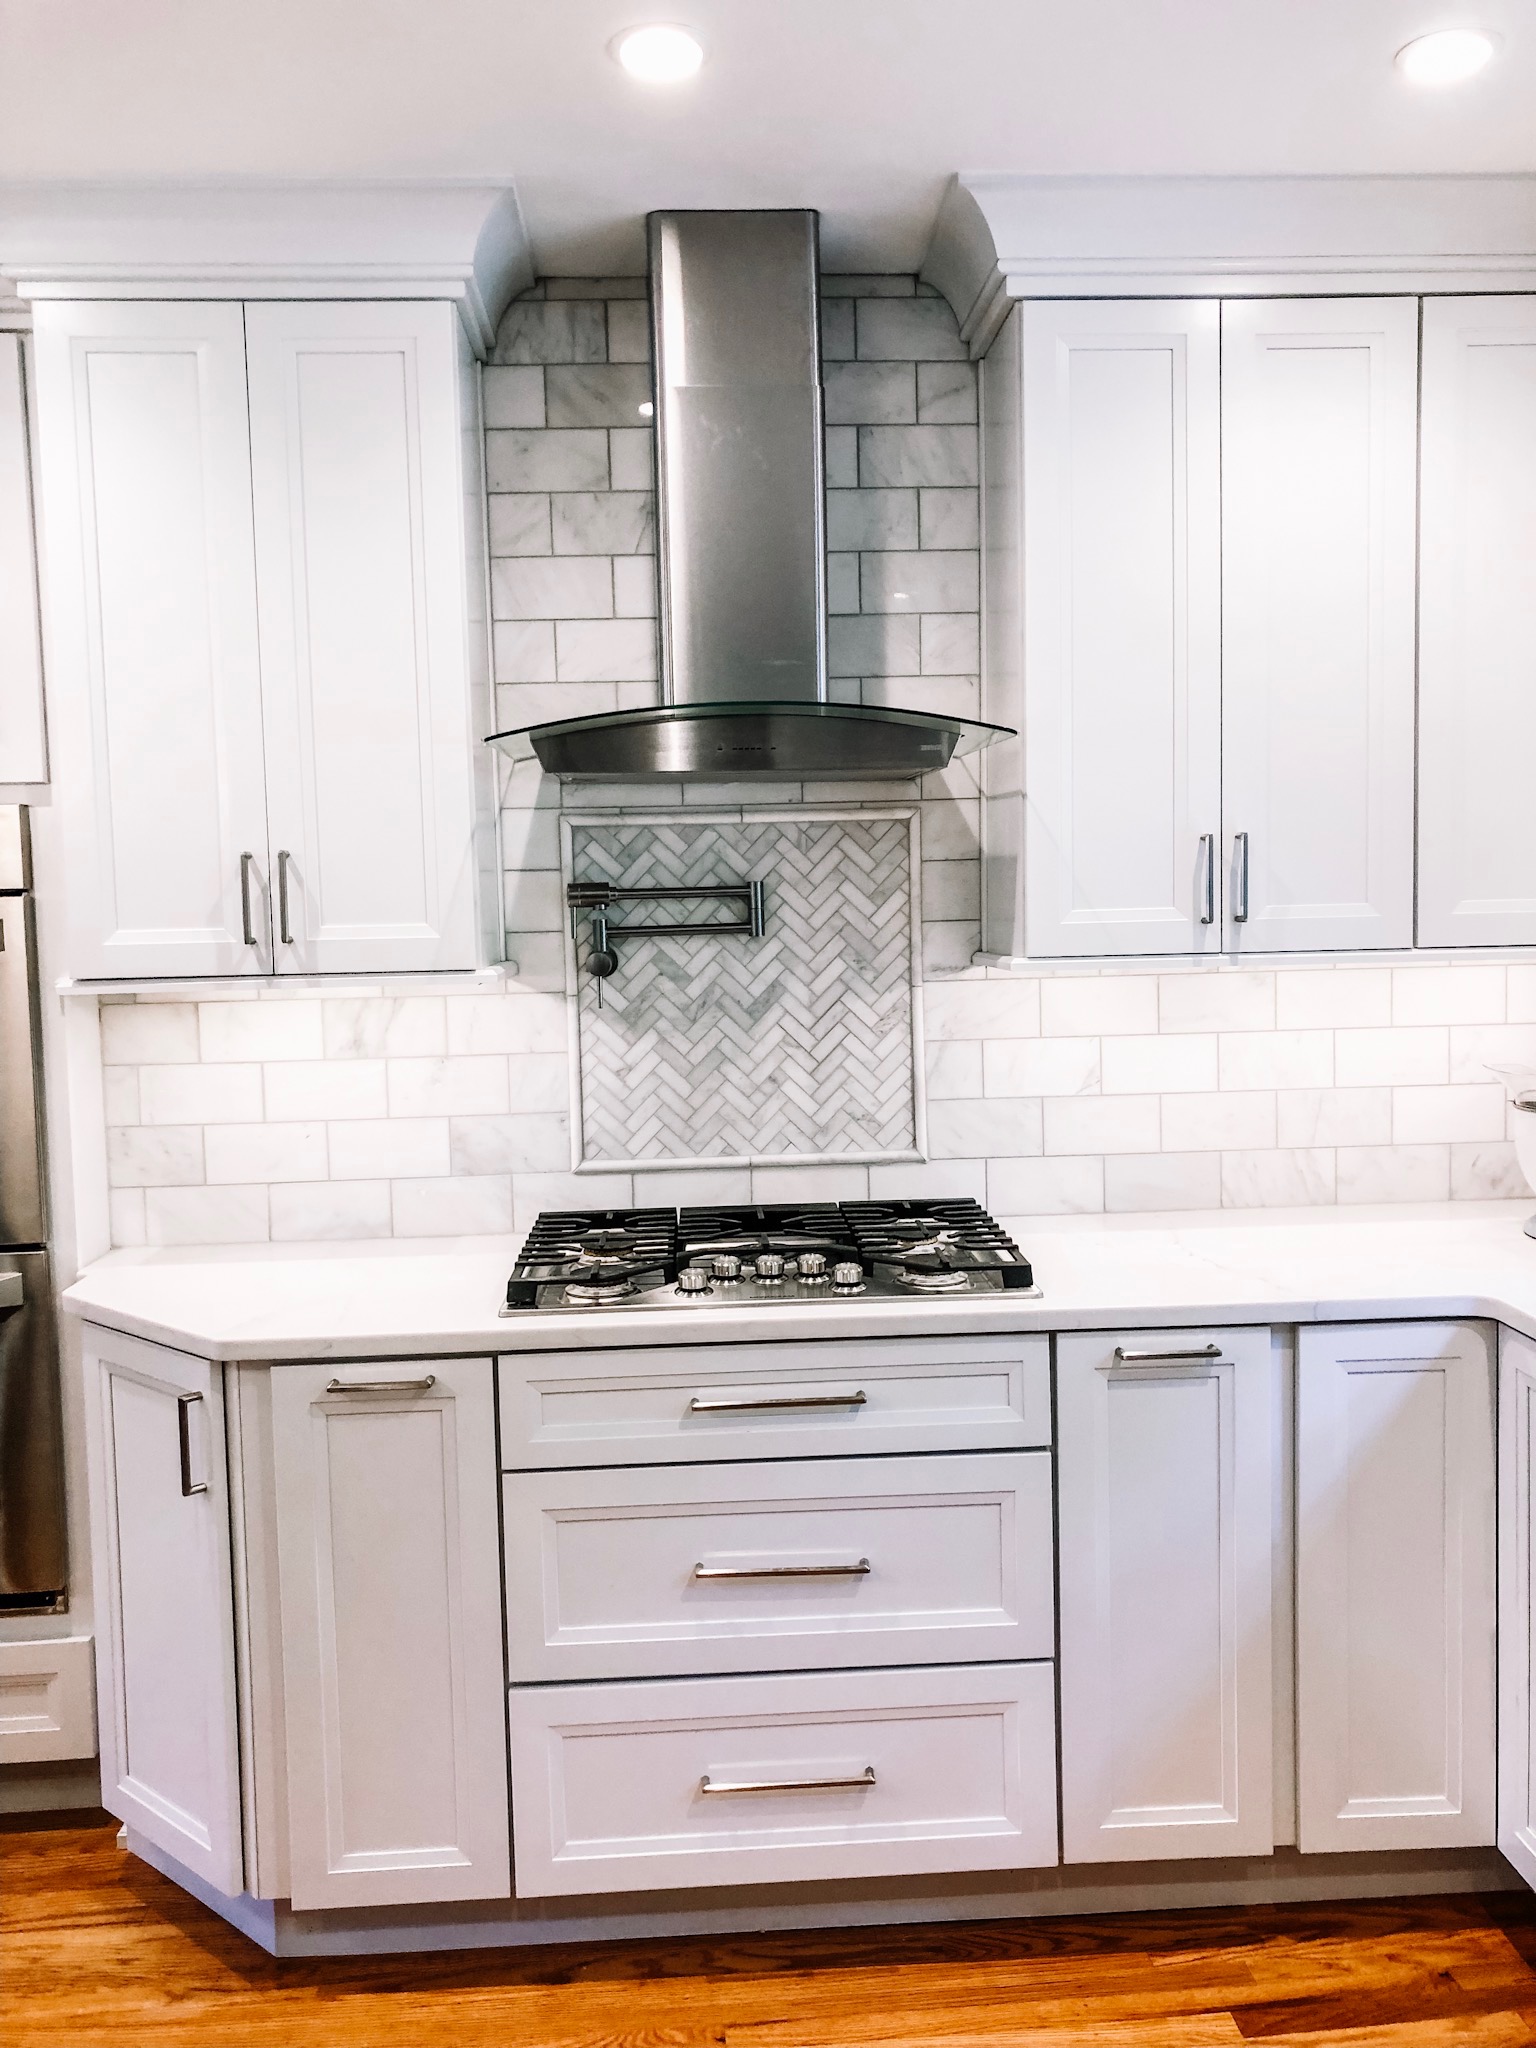 Marble Herringbone oven inset with Marble subway tile and white cabinetry.